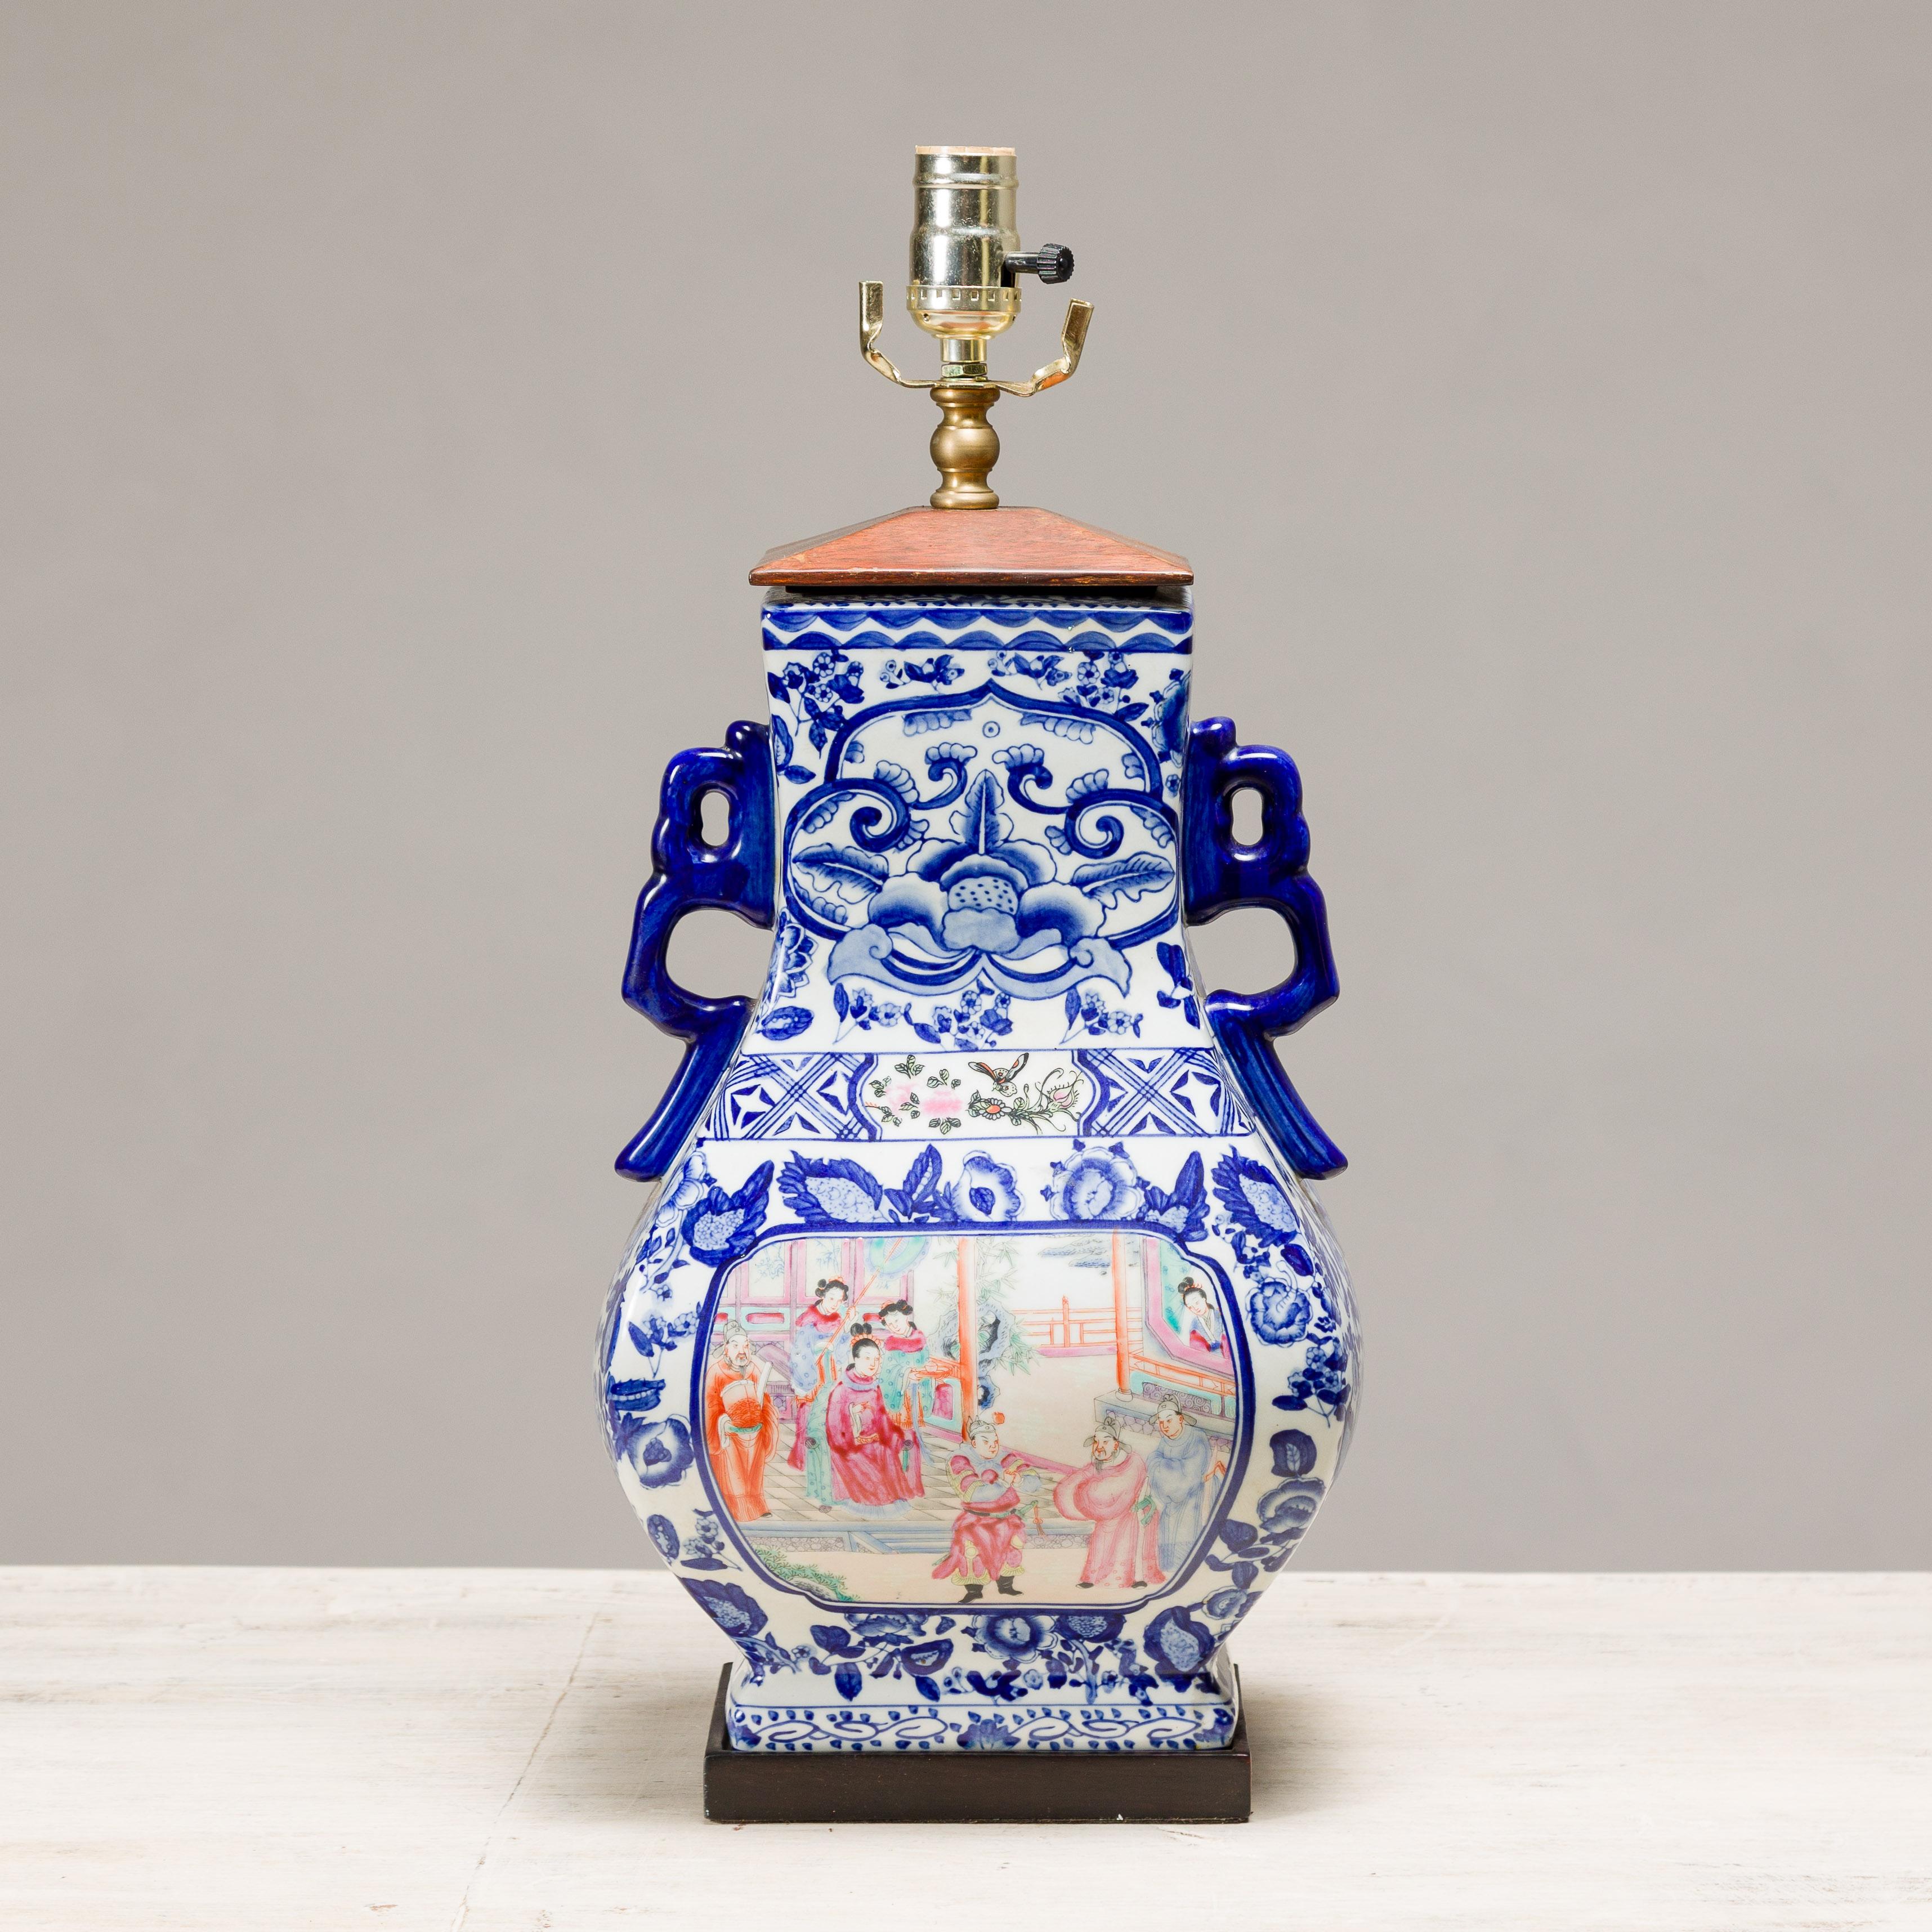 20th Century Blue and White Porcelain Table Lamp with Hand-Painted Court Scenes For Sale